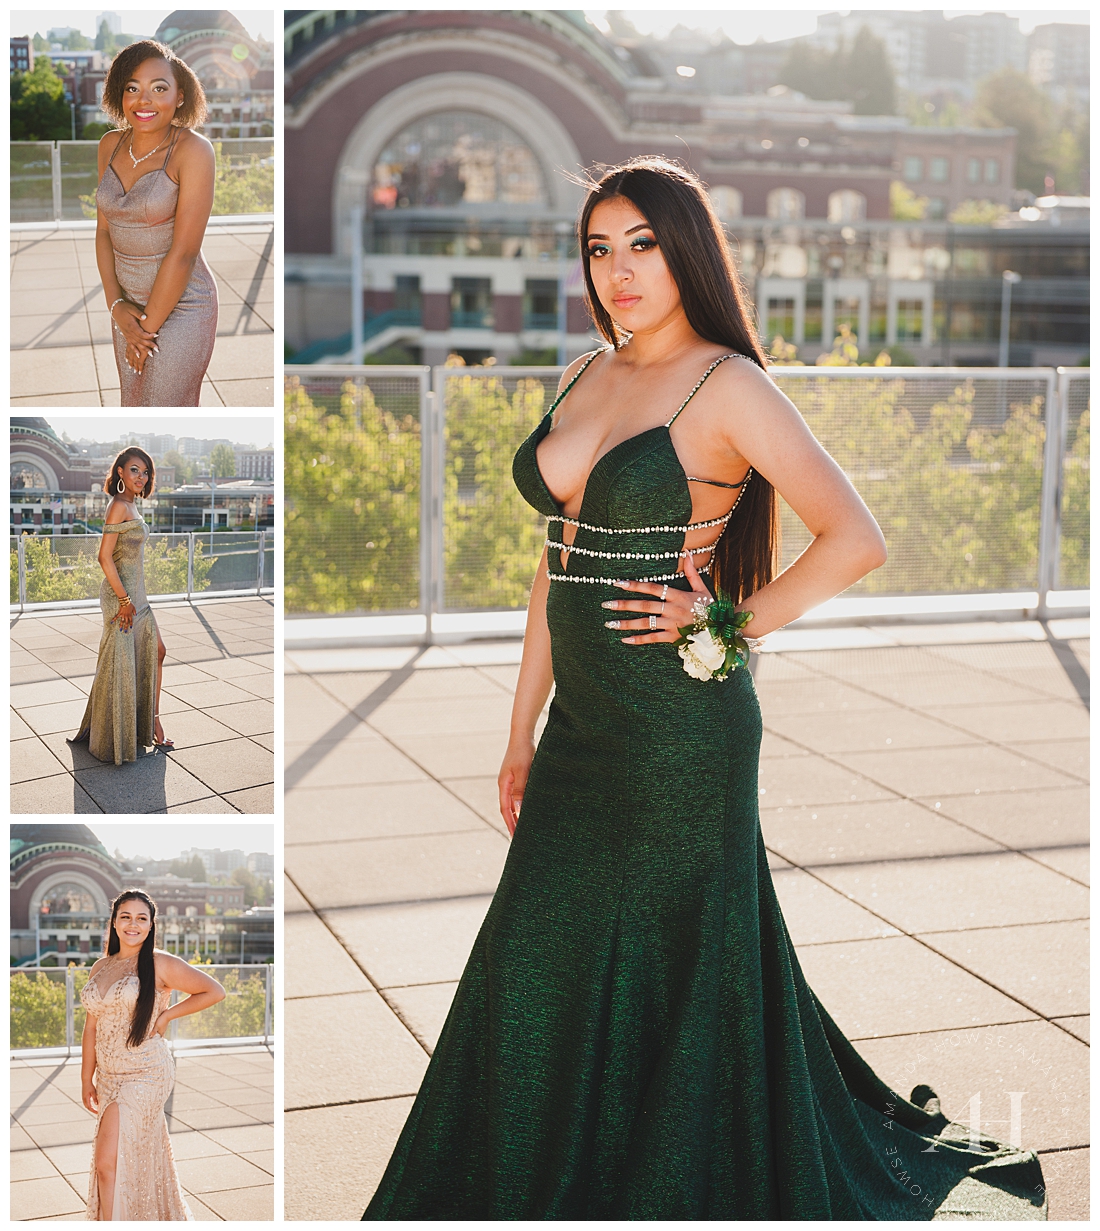 Glam prom portraits with the best dresses photographed by Tacoma senior photographer Amanda Howse